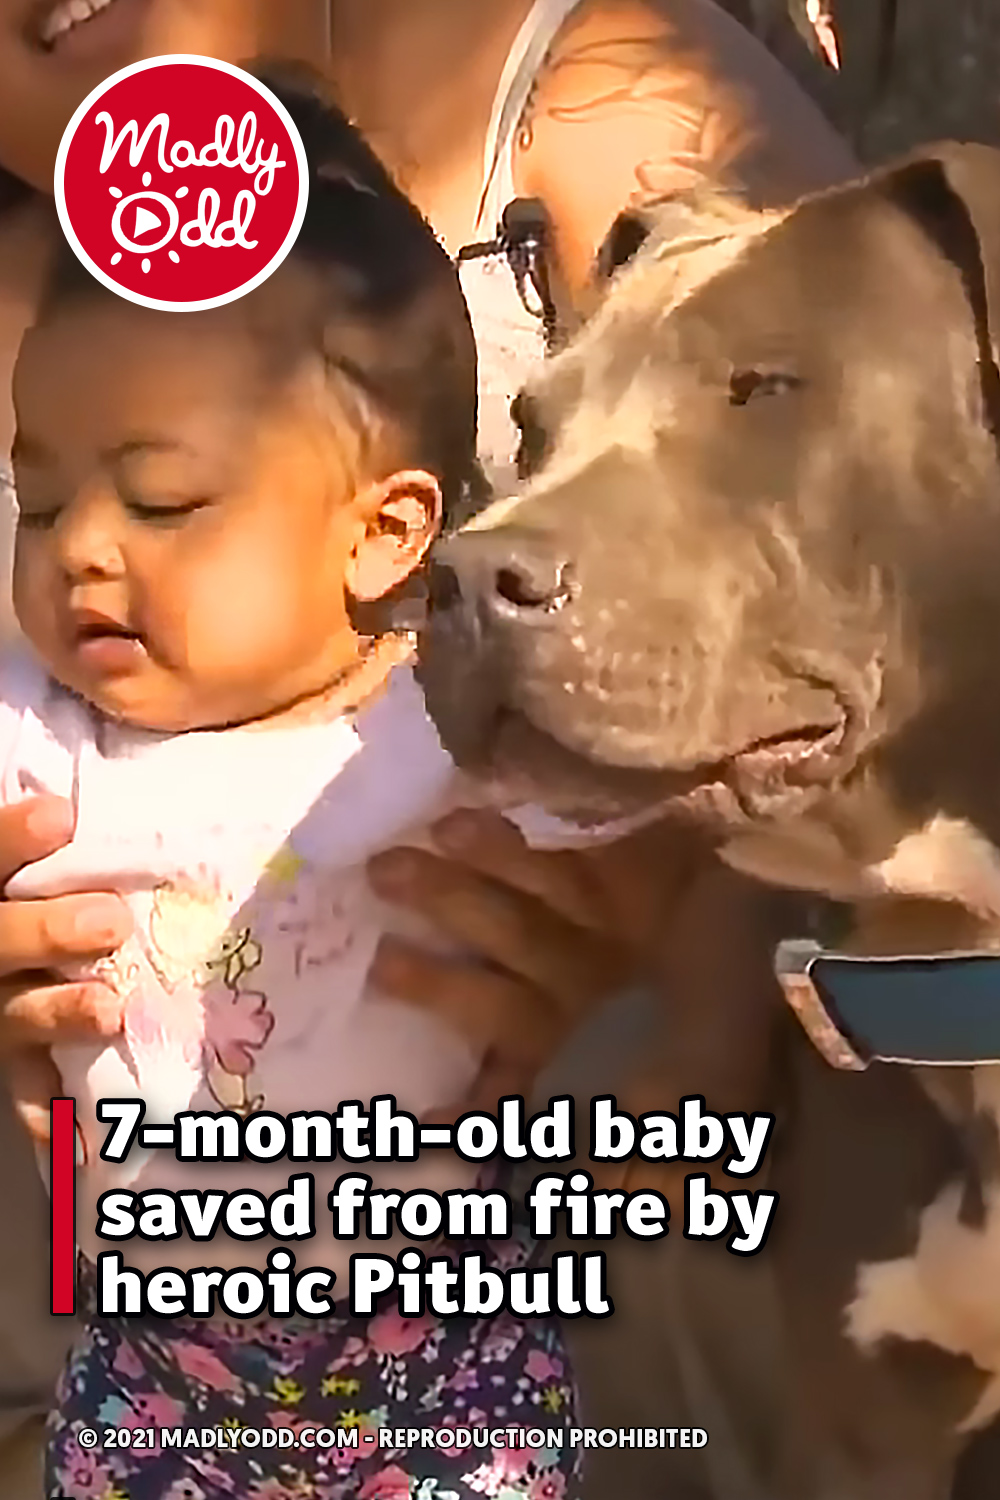 7-month-old baby saved from fire by heroic Pitbull